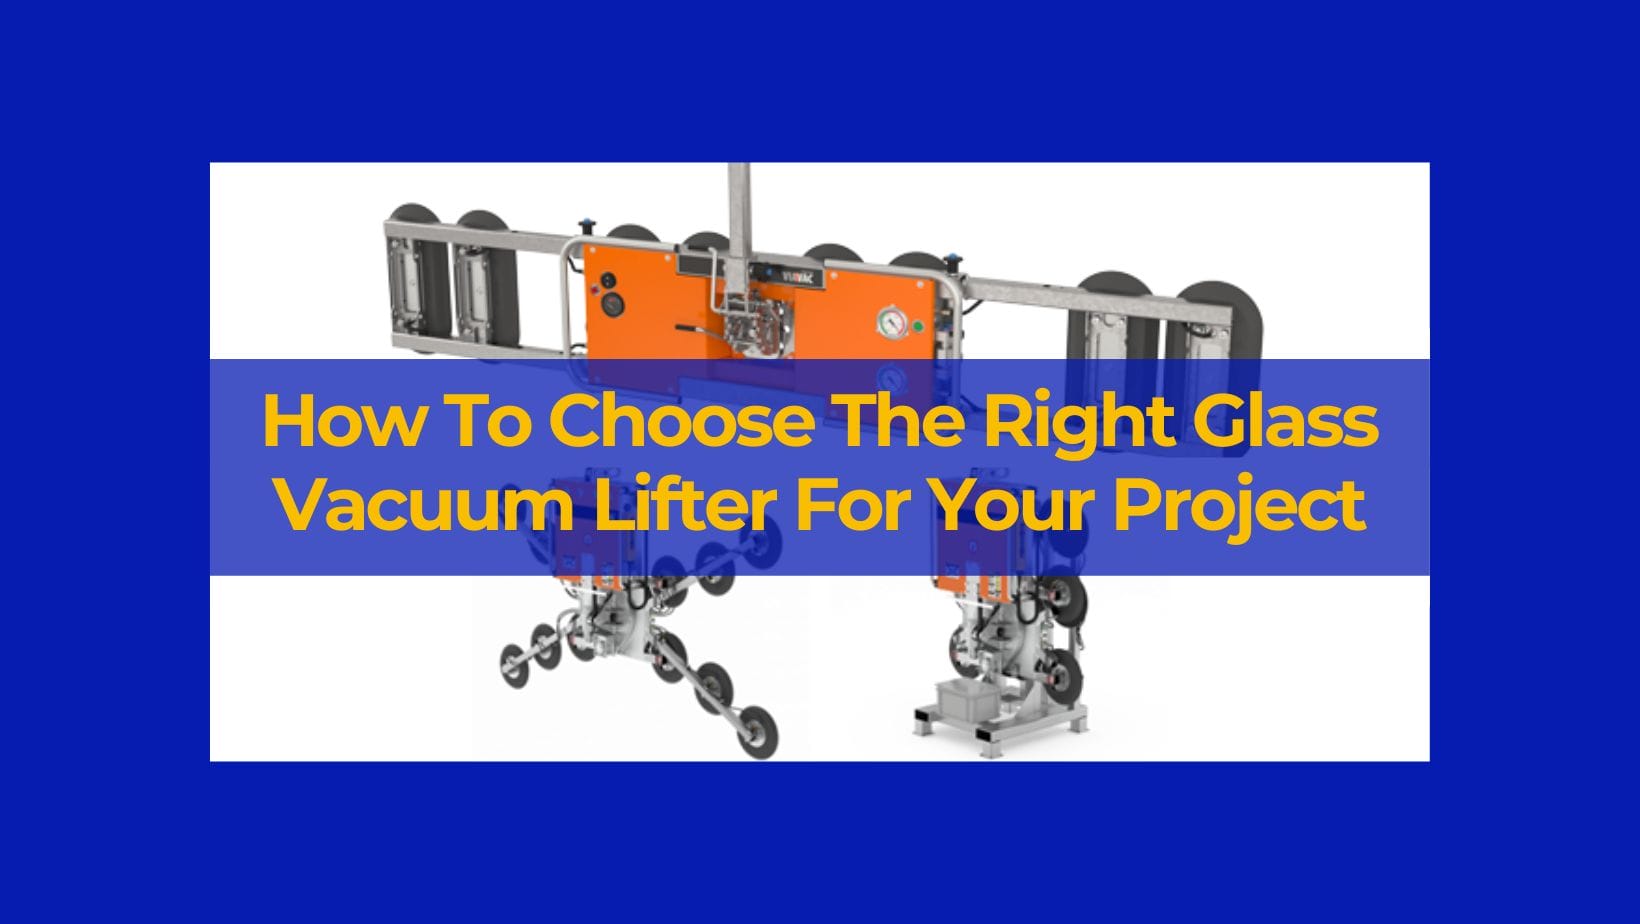 How to Choose the Right Glass Vacuum Lifter for Your Project